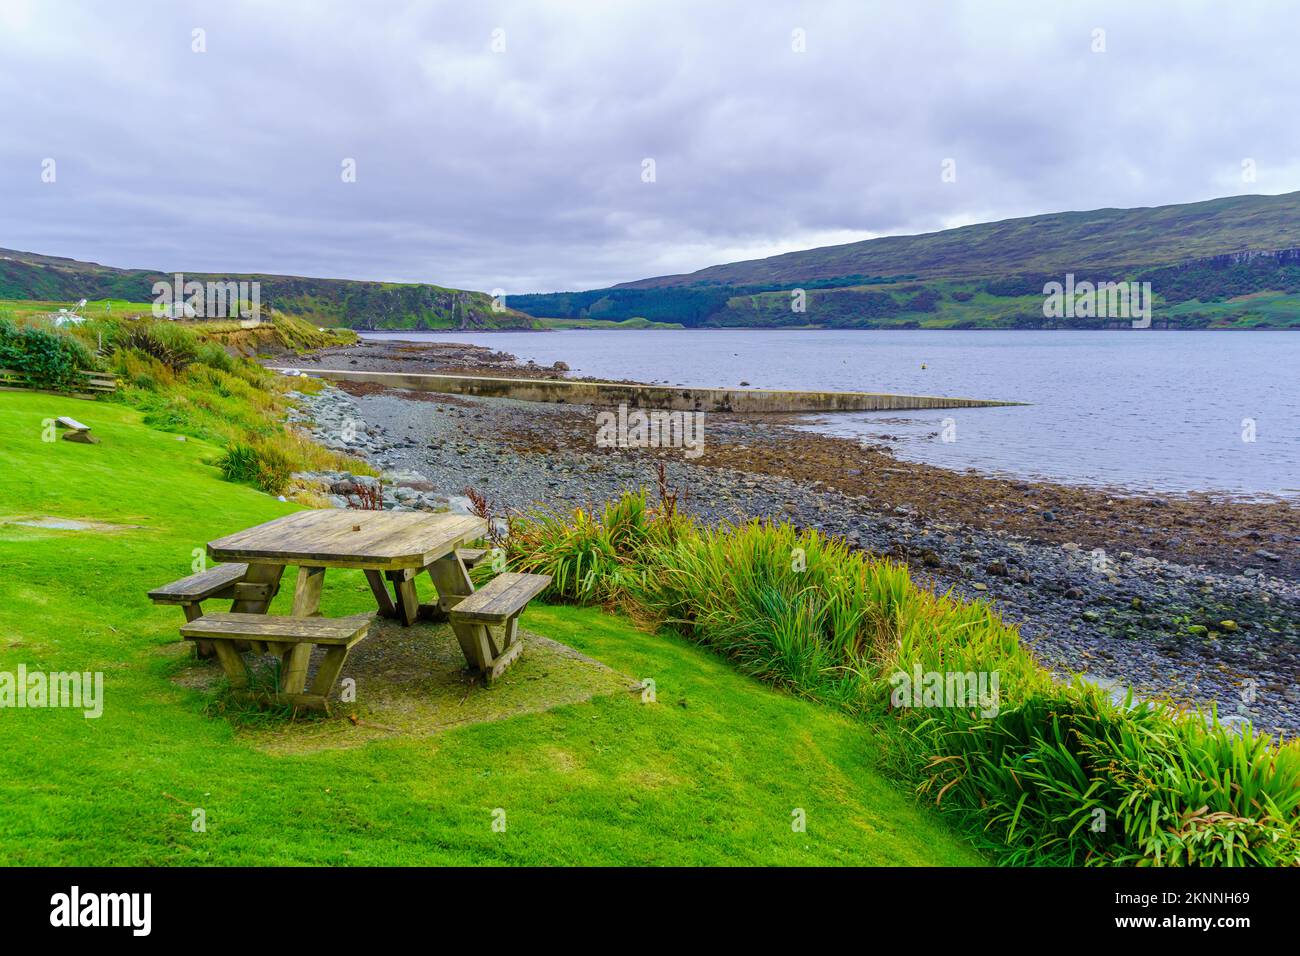 View of Loch Bay, and Waternish peninsula landscape, in the Isle of Skye, Inner Hebrides, Scotland, UK Stock Photo